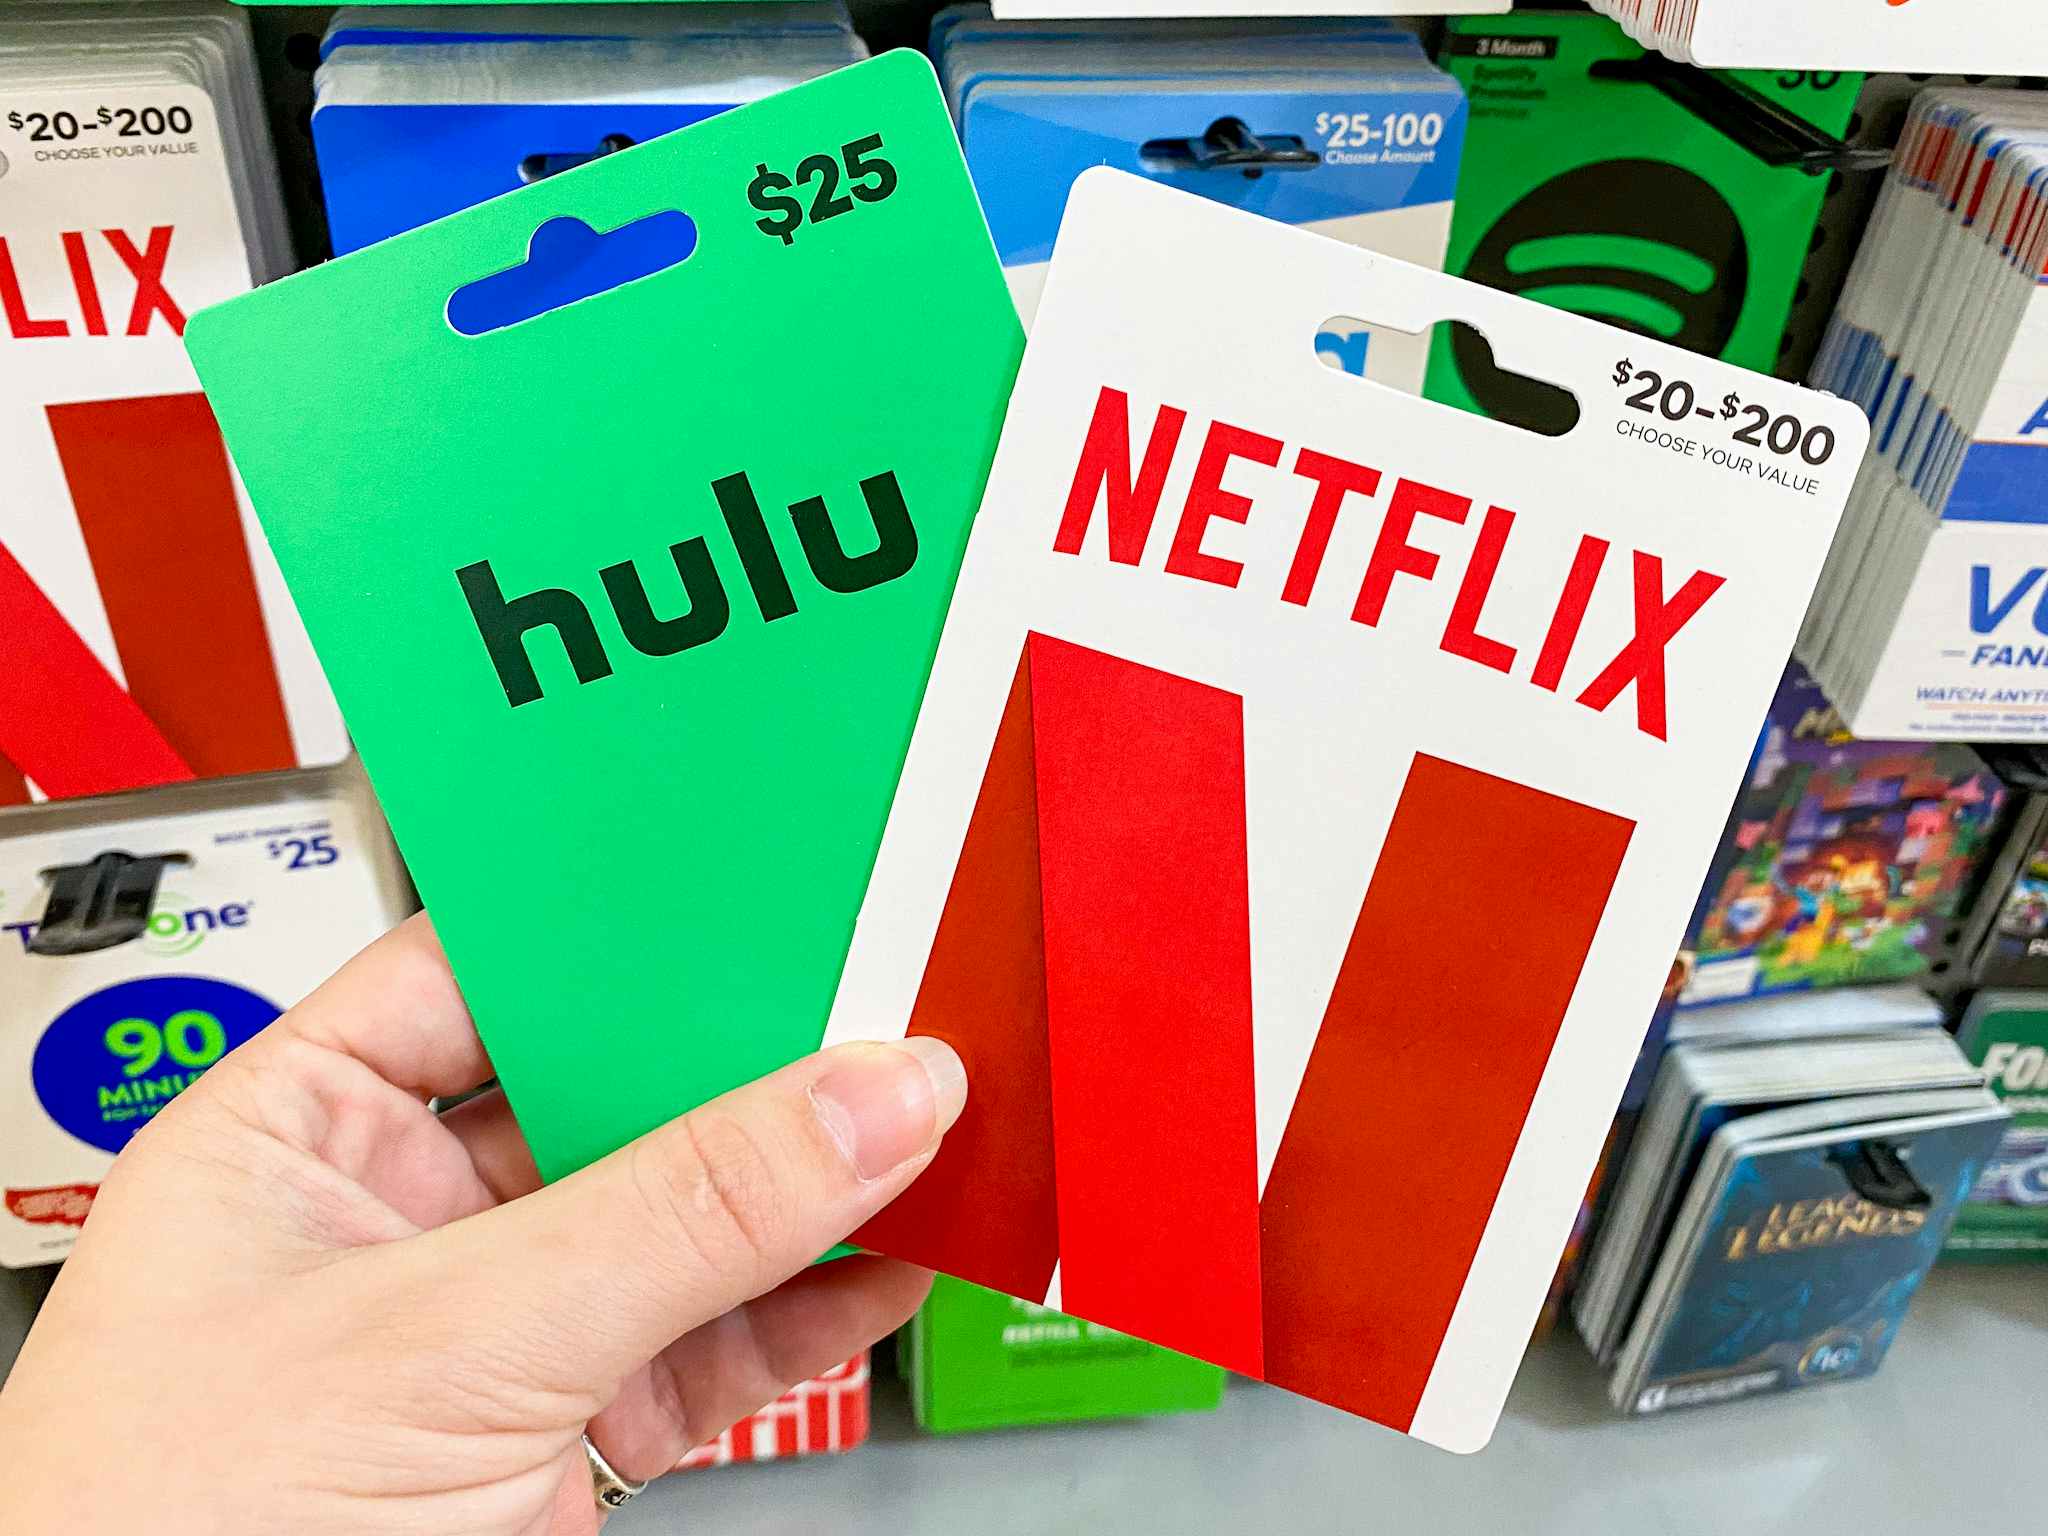 A person's hand holding Hulu and Netflix gift cards in front of a display of gift cards at Walmart.